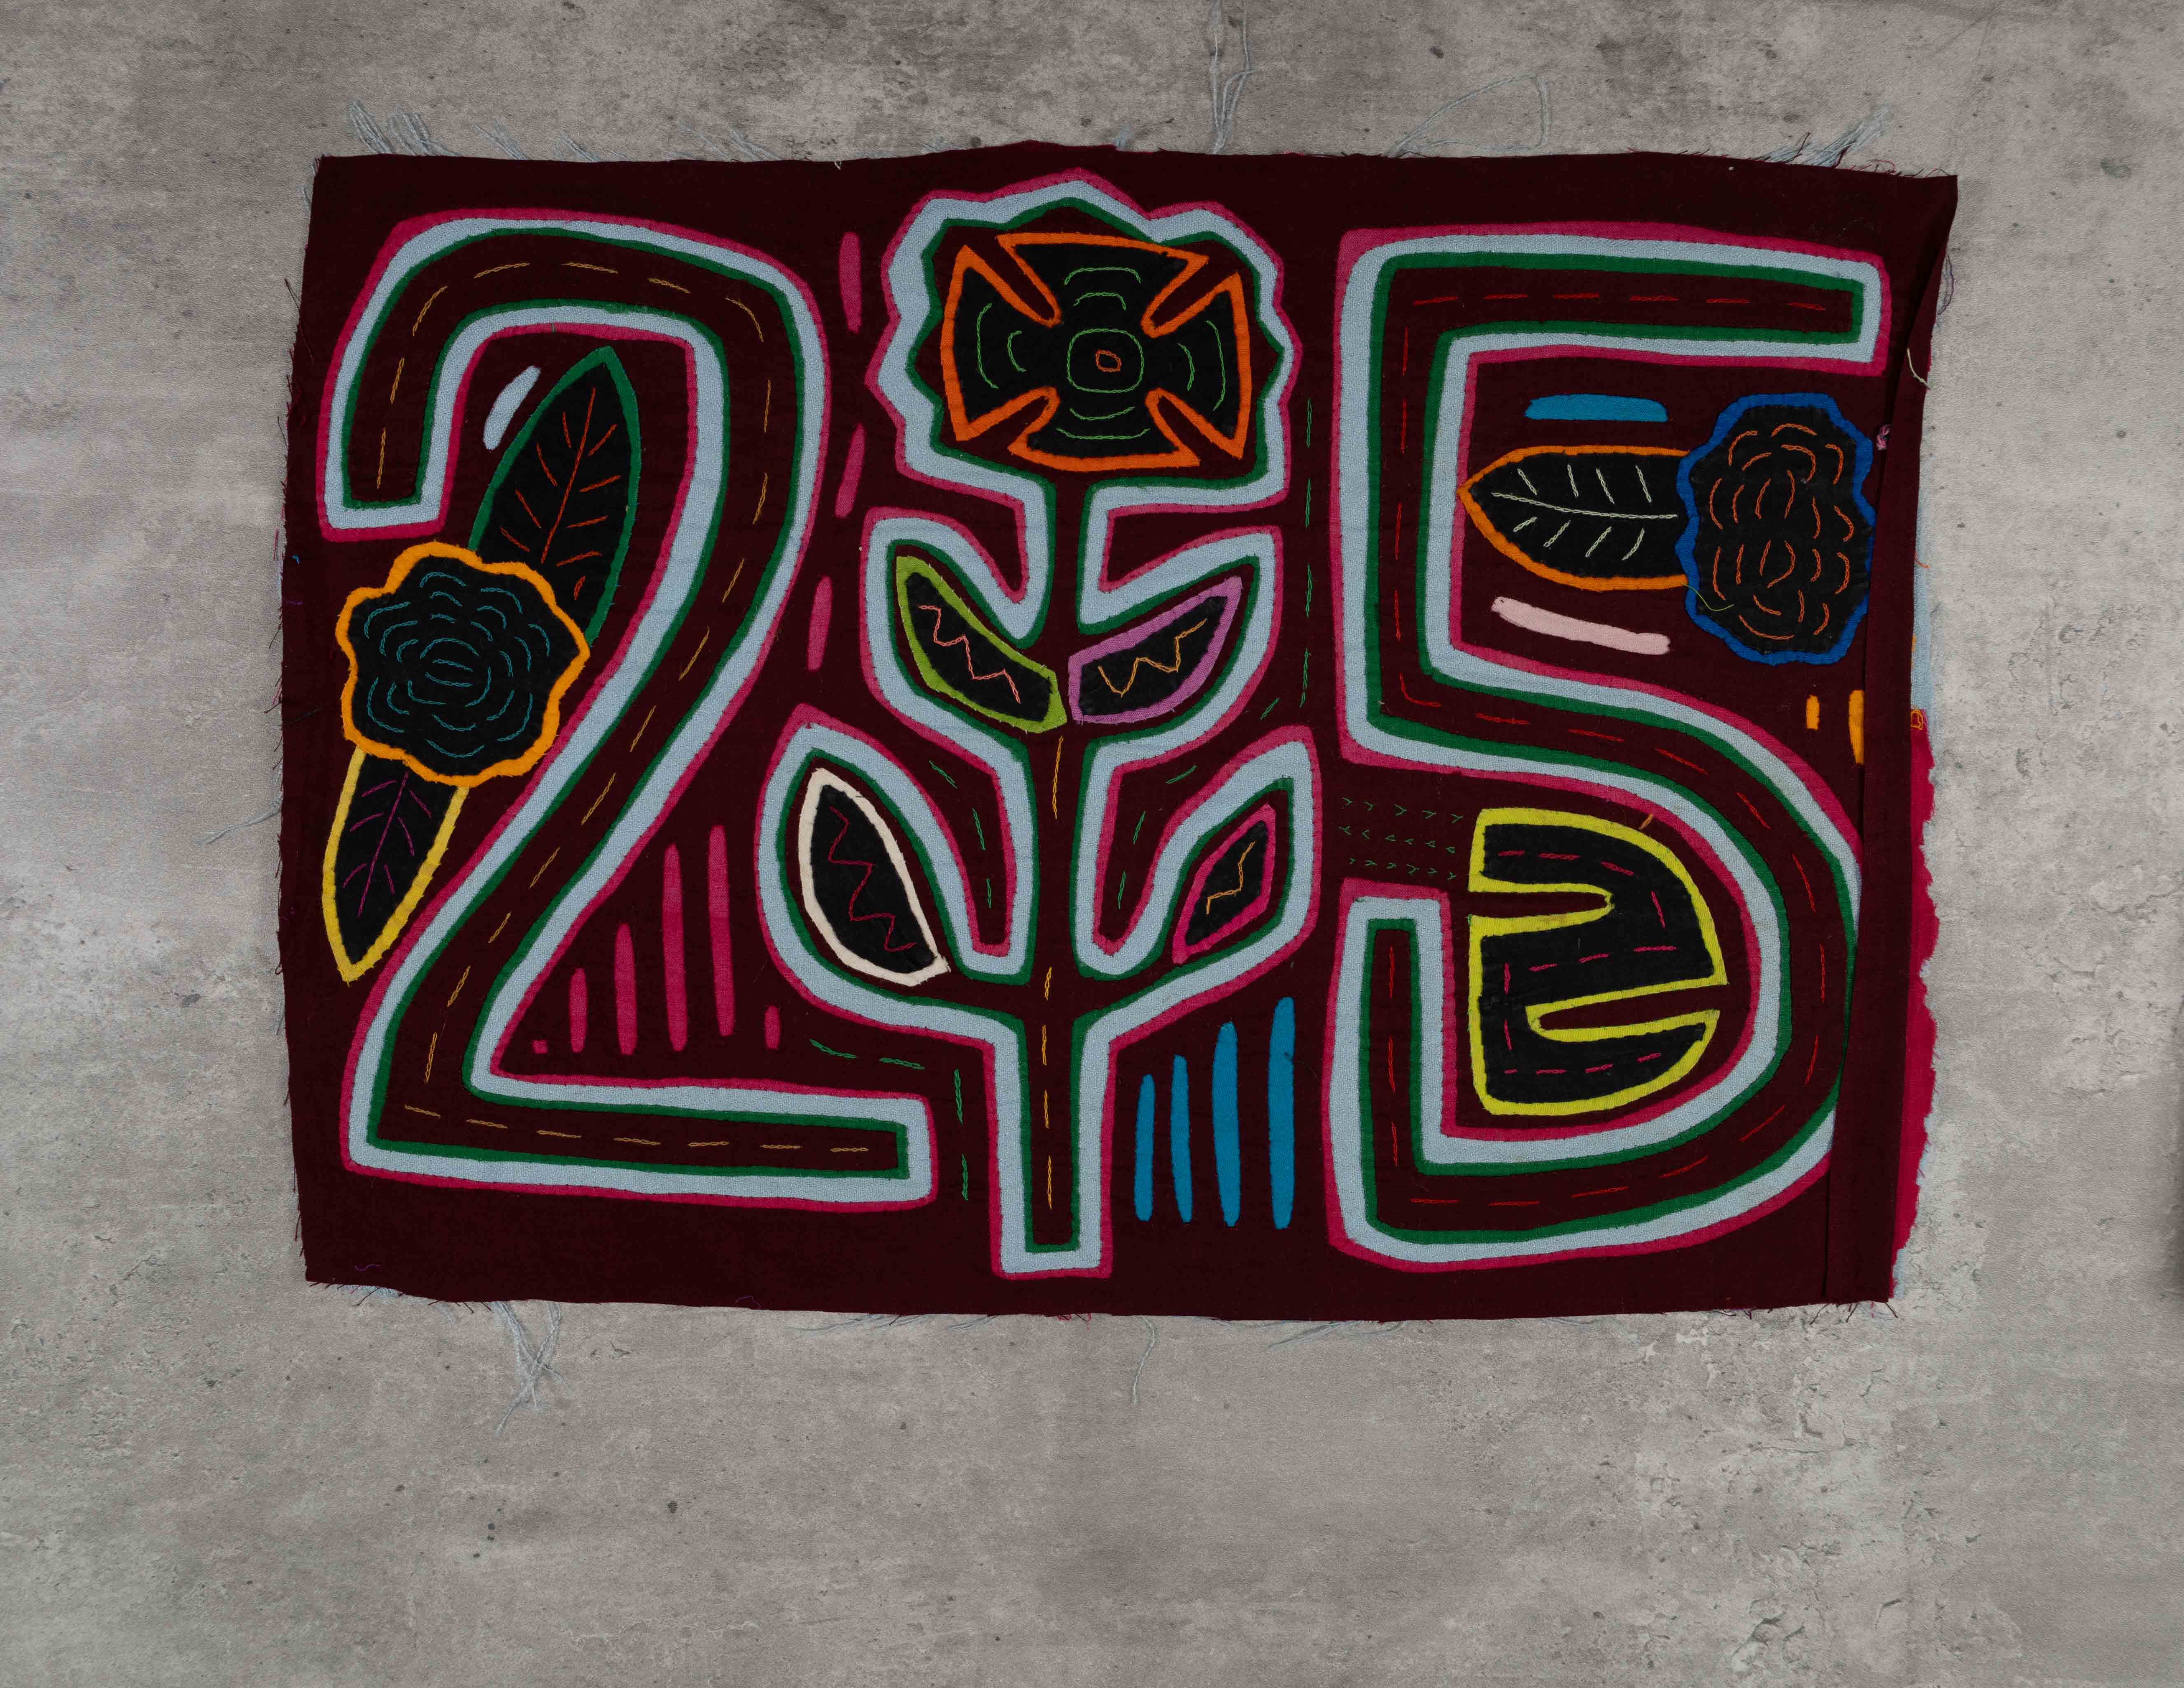 Burgundy And Blue Flower With the Famous "25" Mola